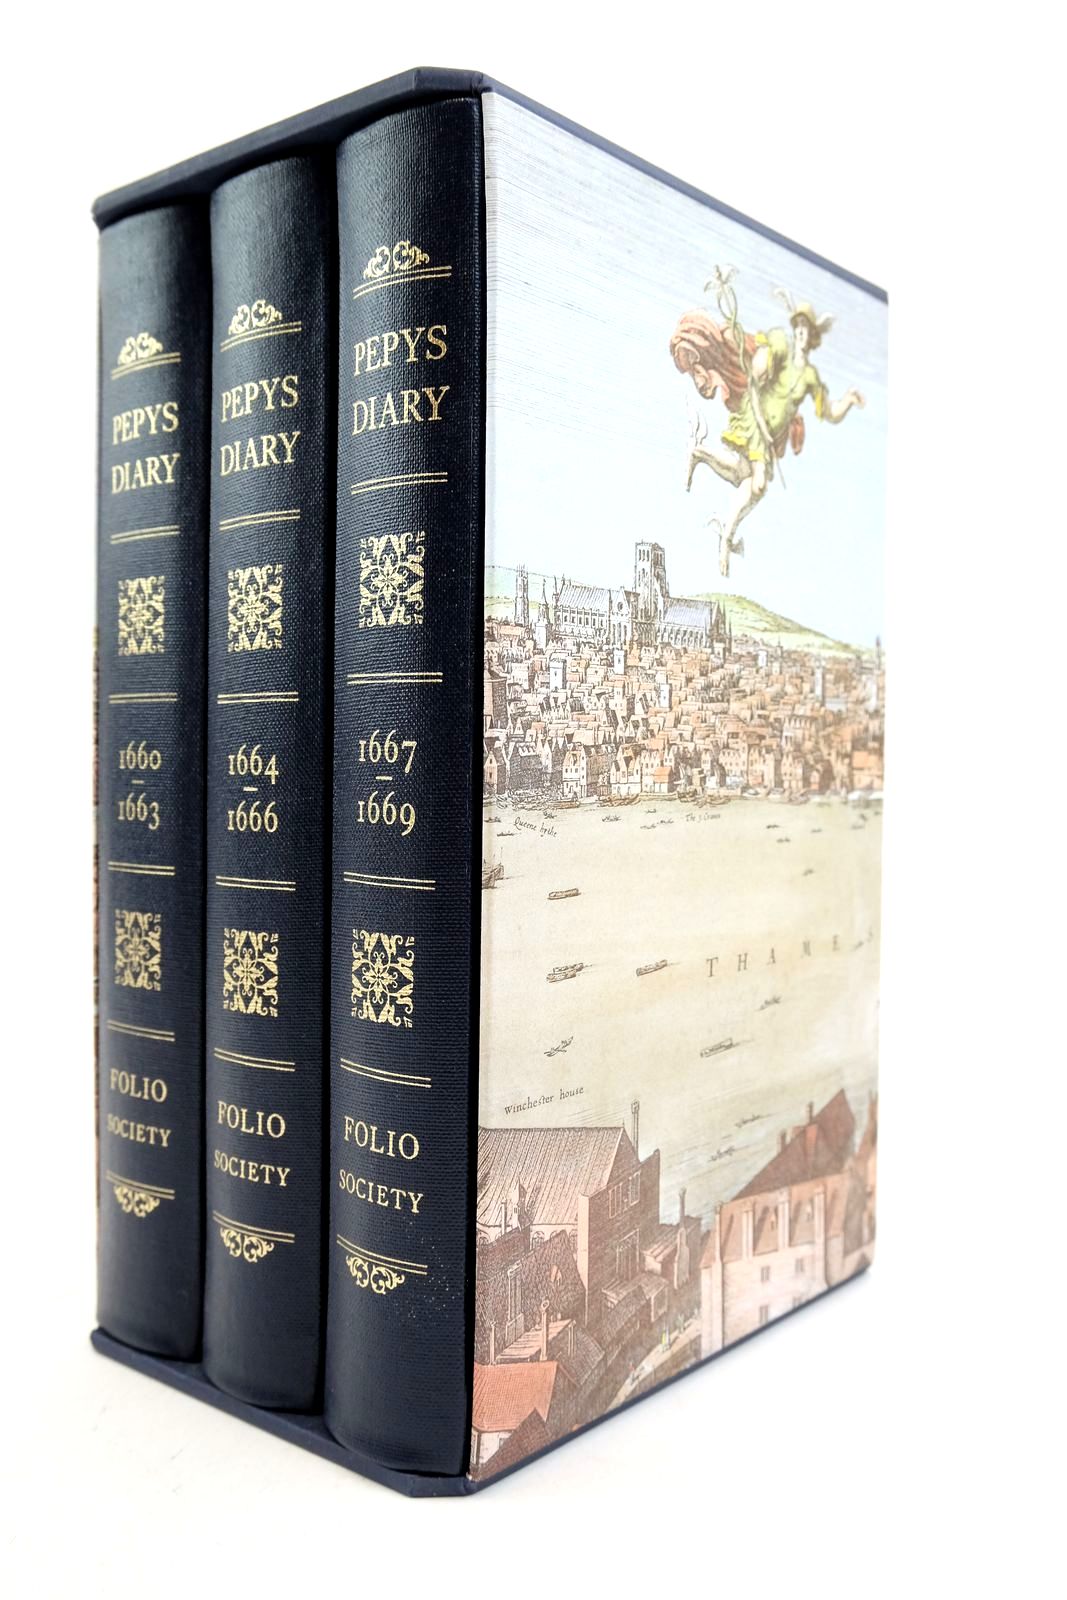 Photo of PEPYS'S DIARY (3 VOLUMES) written by Pepys, Samuel Latham, Robert published by Folio Society (STOCK CODE: 2139453)  for sale by Stella & Rose's Books